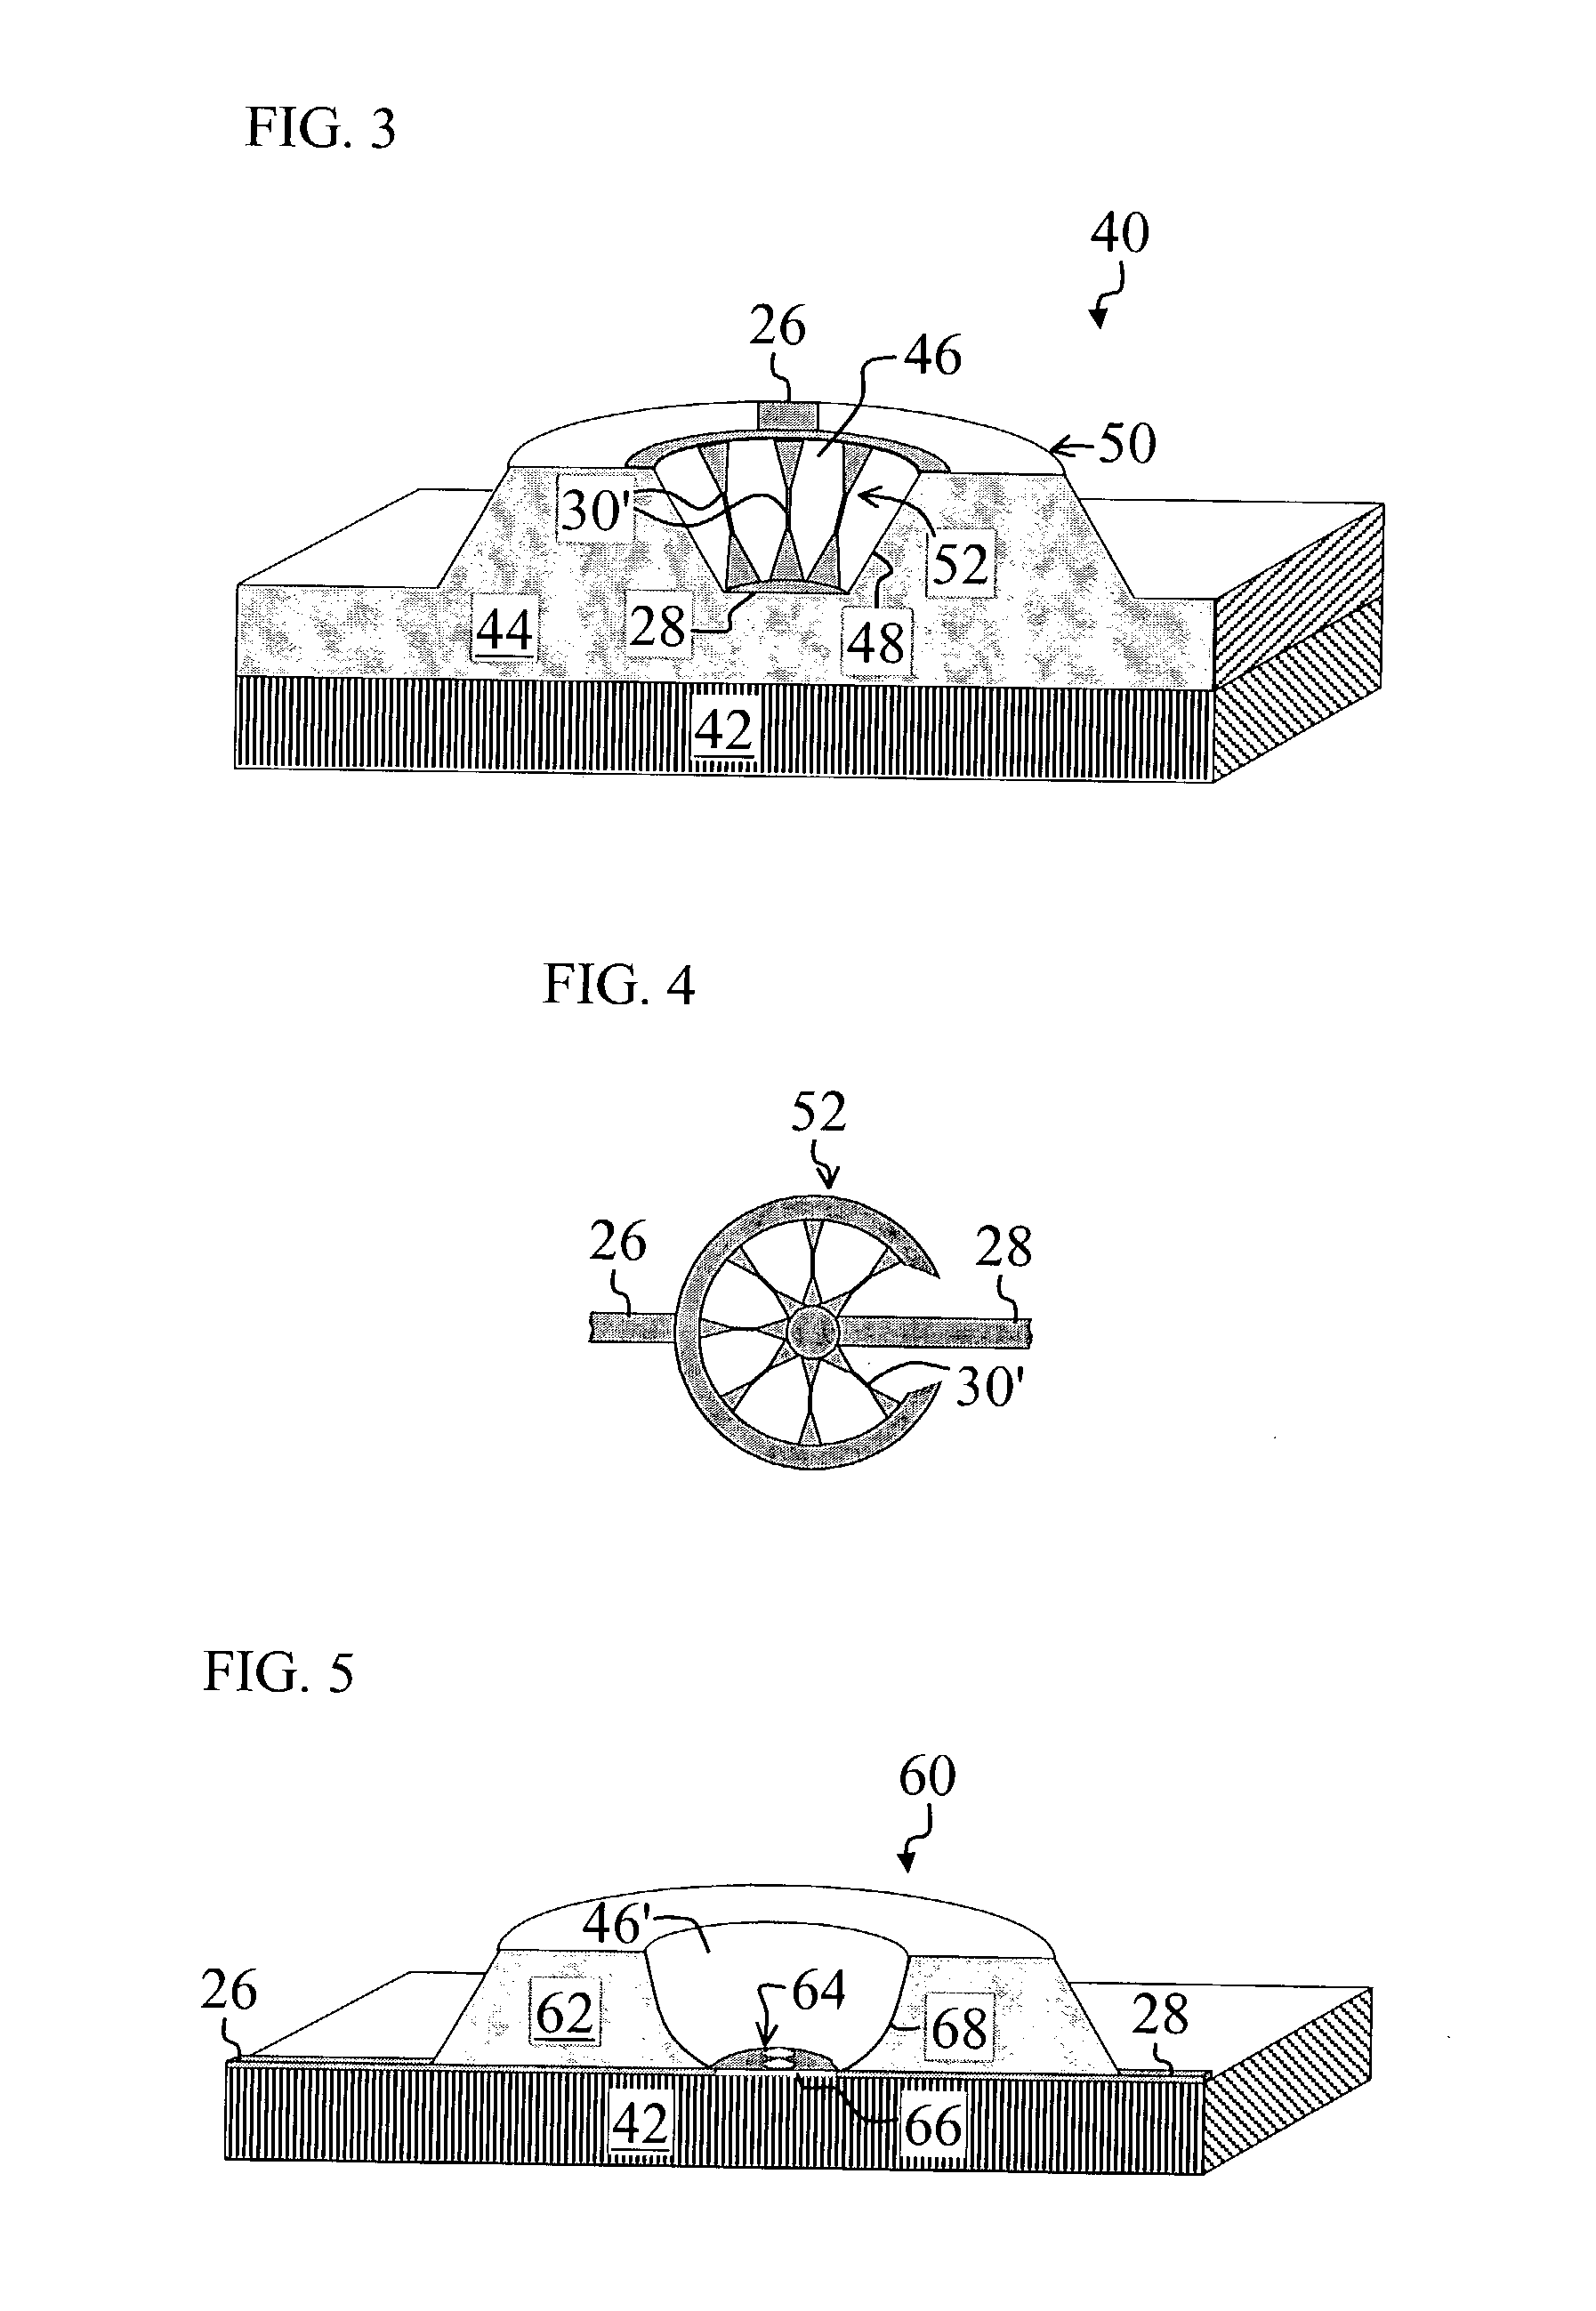 Versatile cavity actuator and systems incorporating same